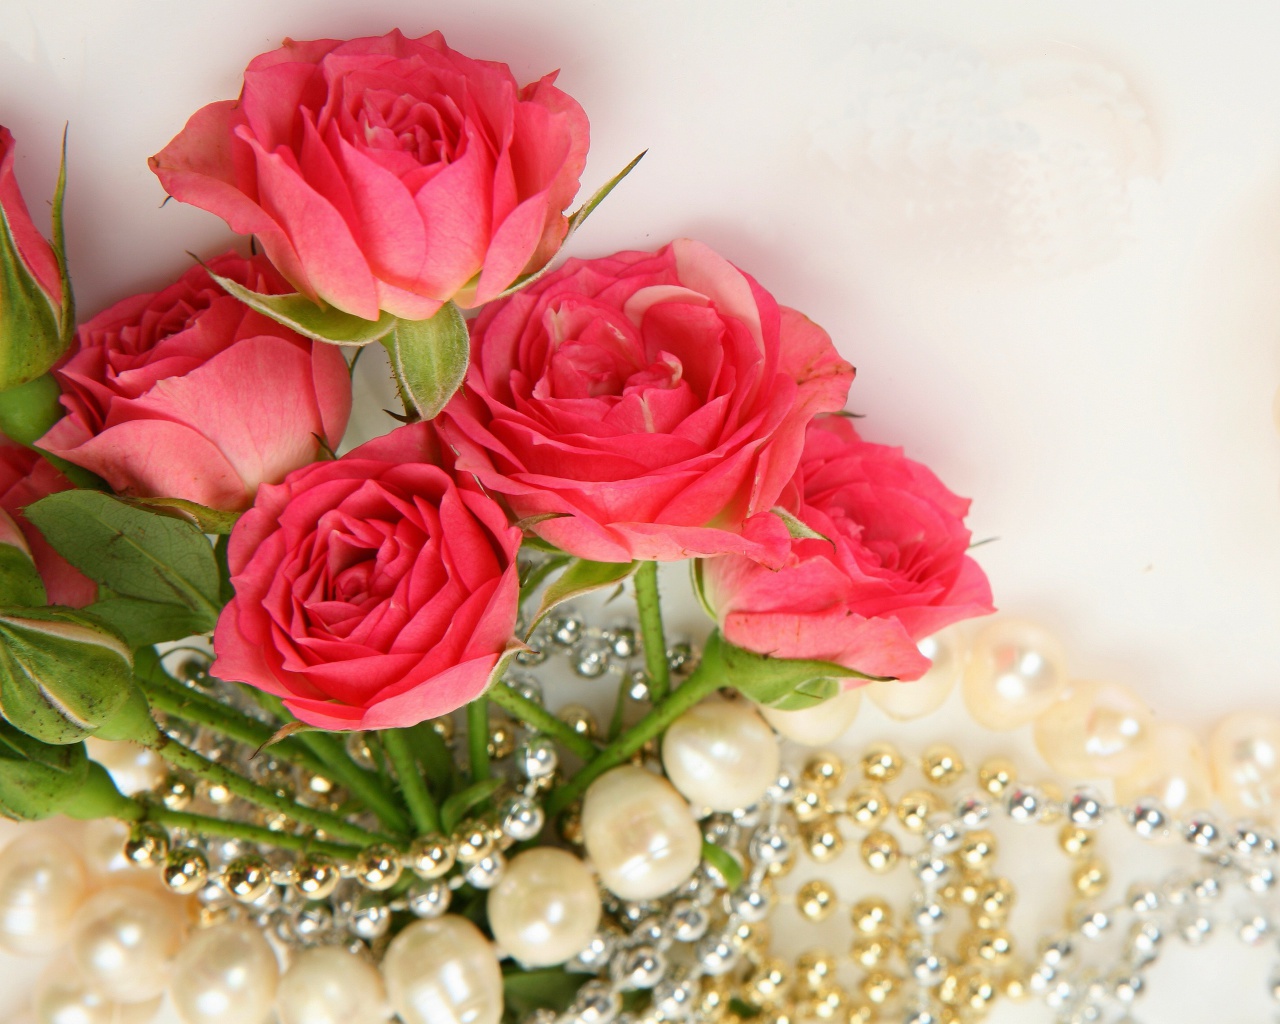 Das Necklace and Roses Bouquet Wallpaper 1280x1024